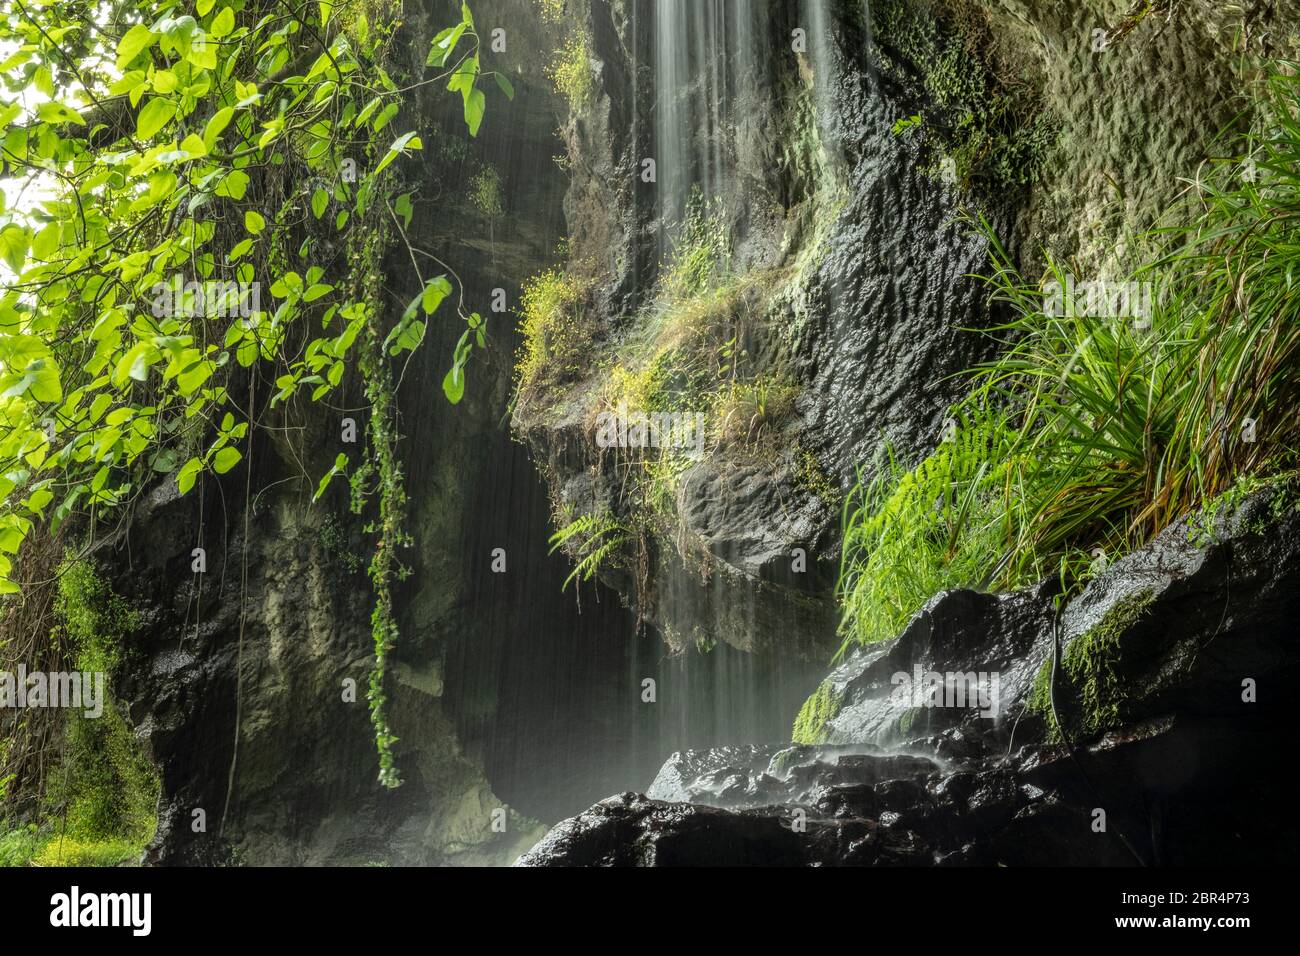 Entrance of the pileki cave located in iyidere district of rize province Stock Photo